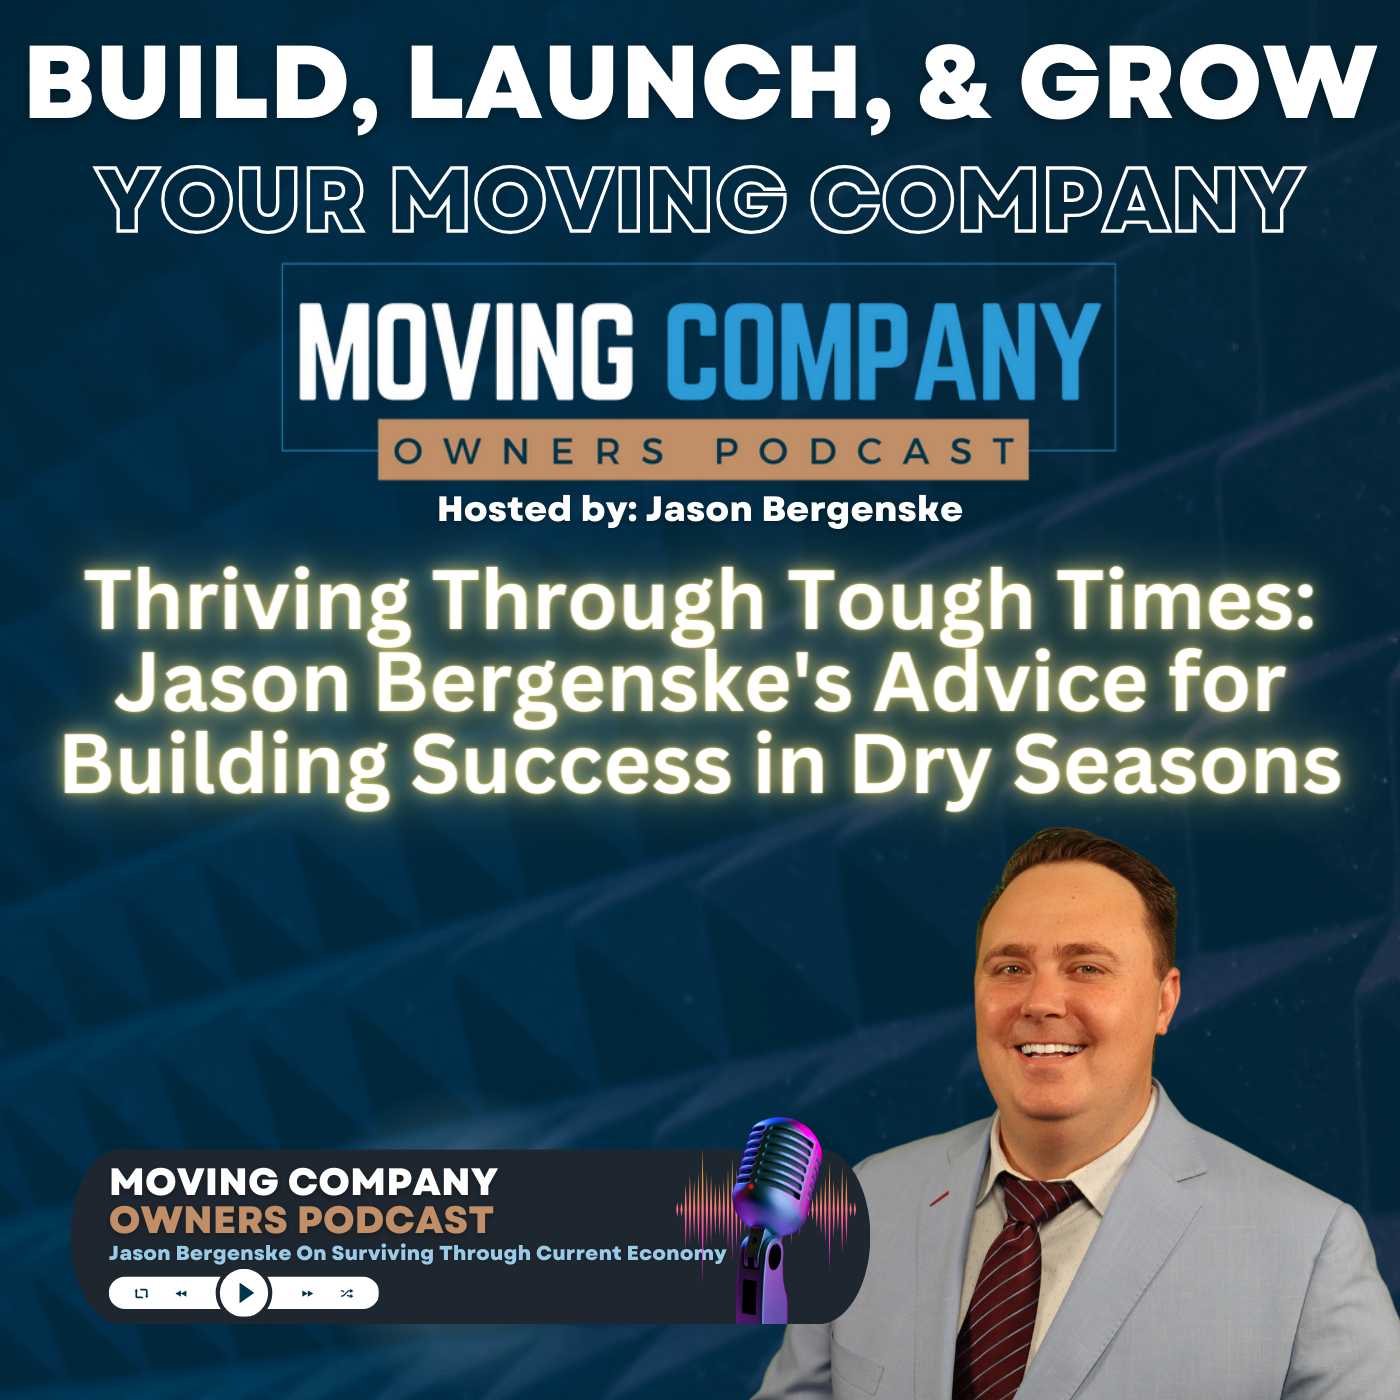 Thriving Through Tough Times: Jason Bergenske's Advice for Building Success in Dry Seasons